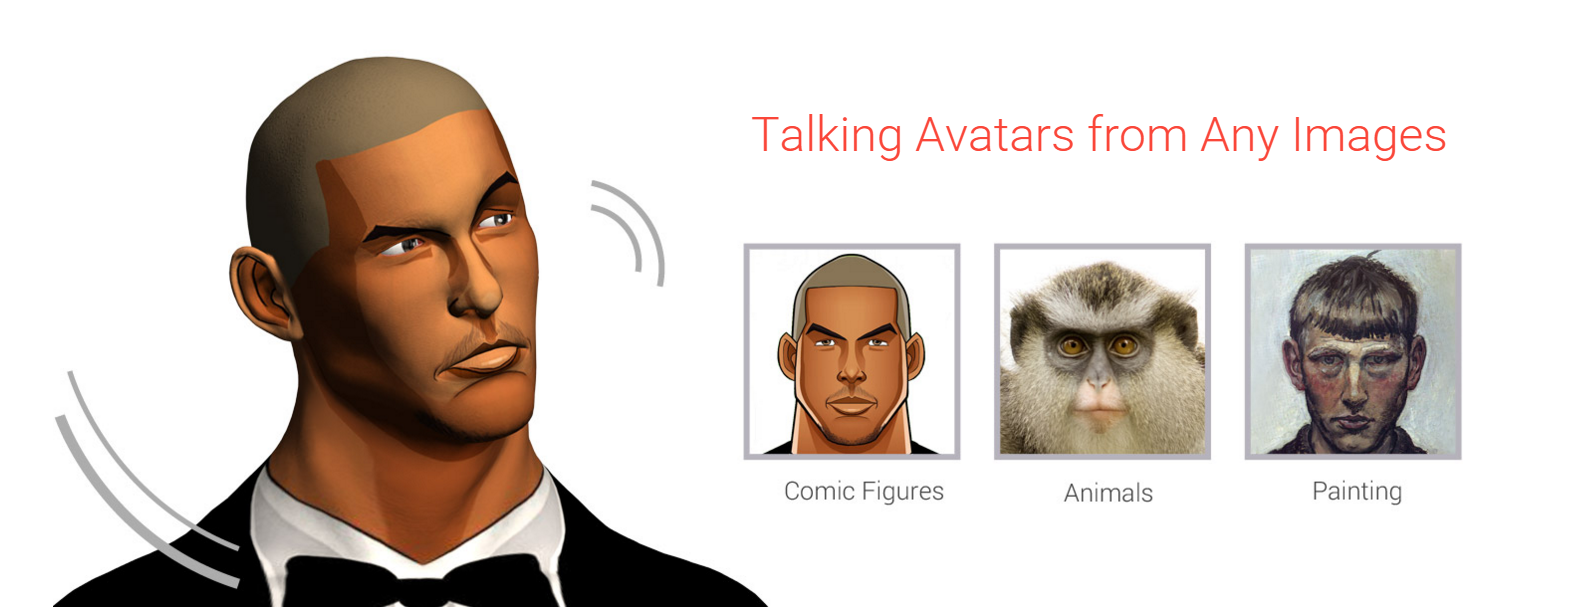 Animate facial images using voice and text.